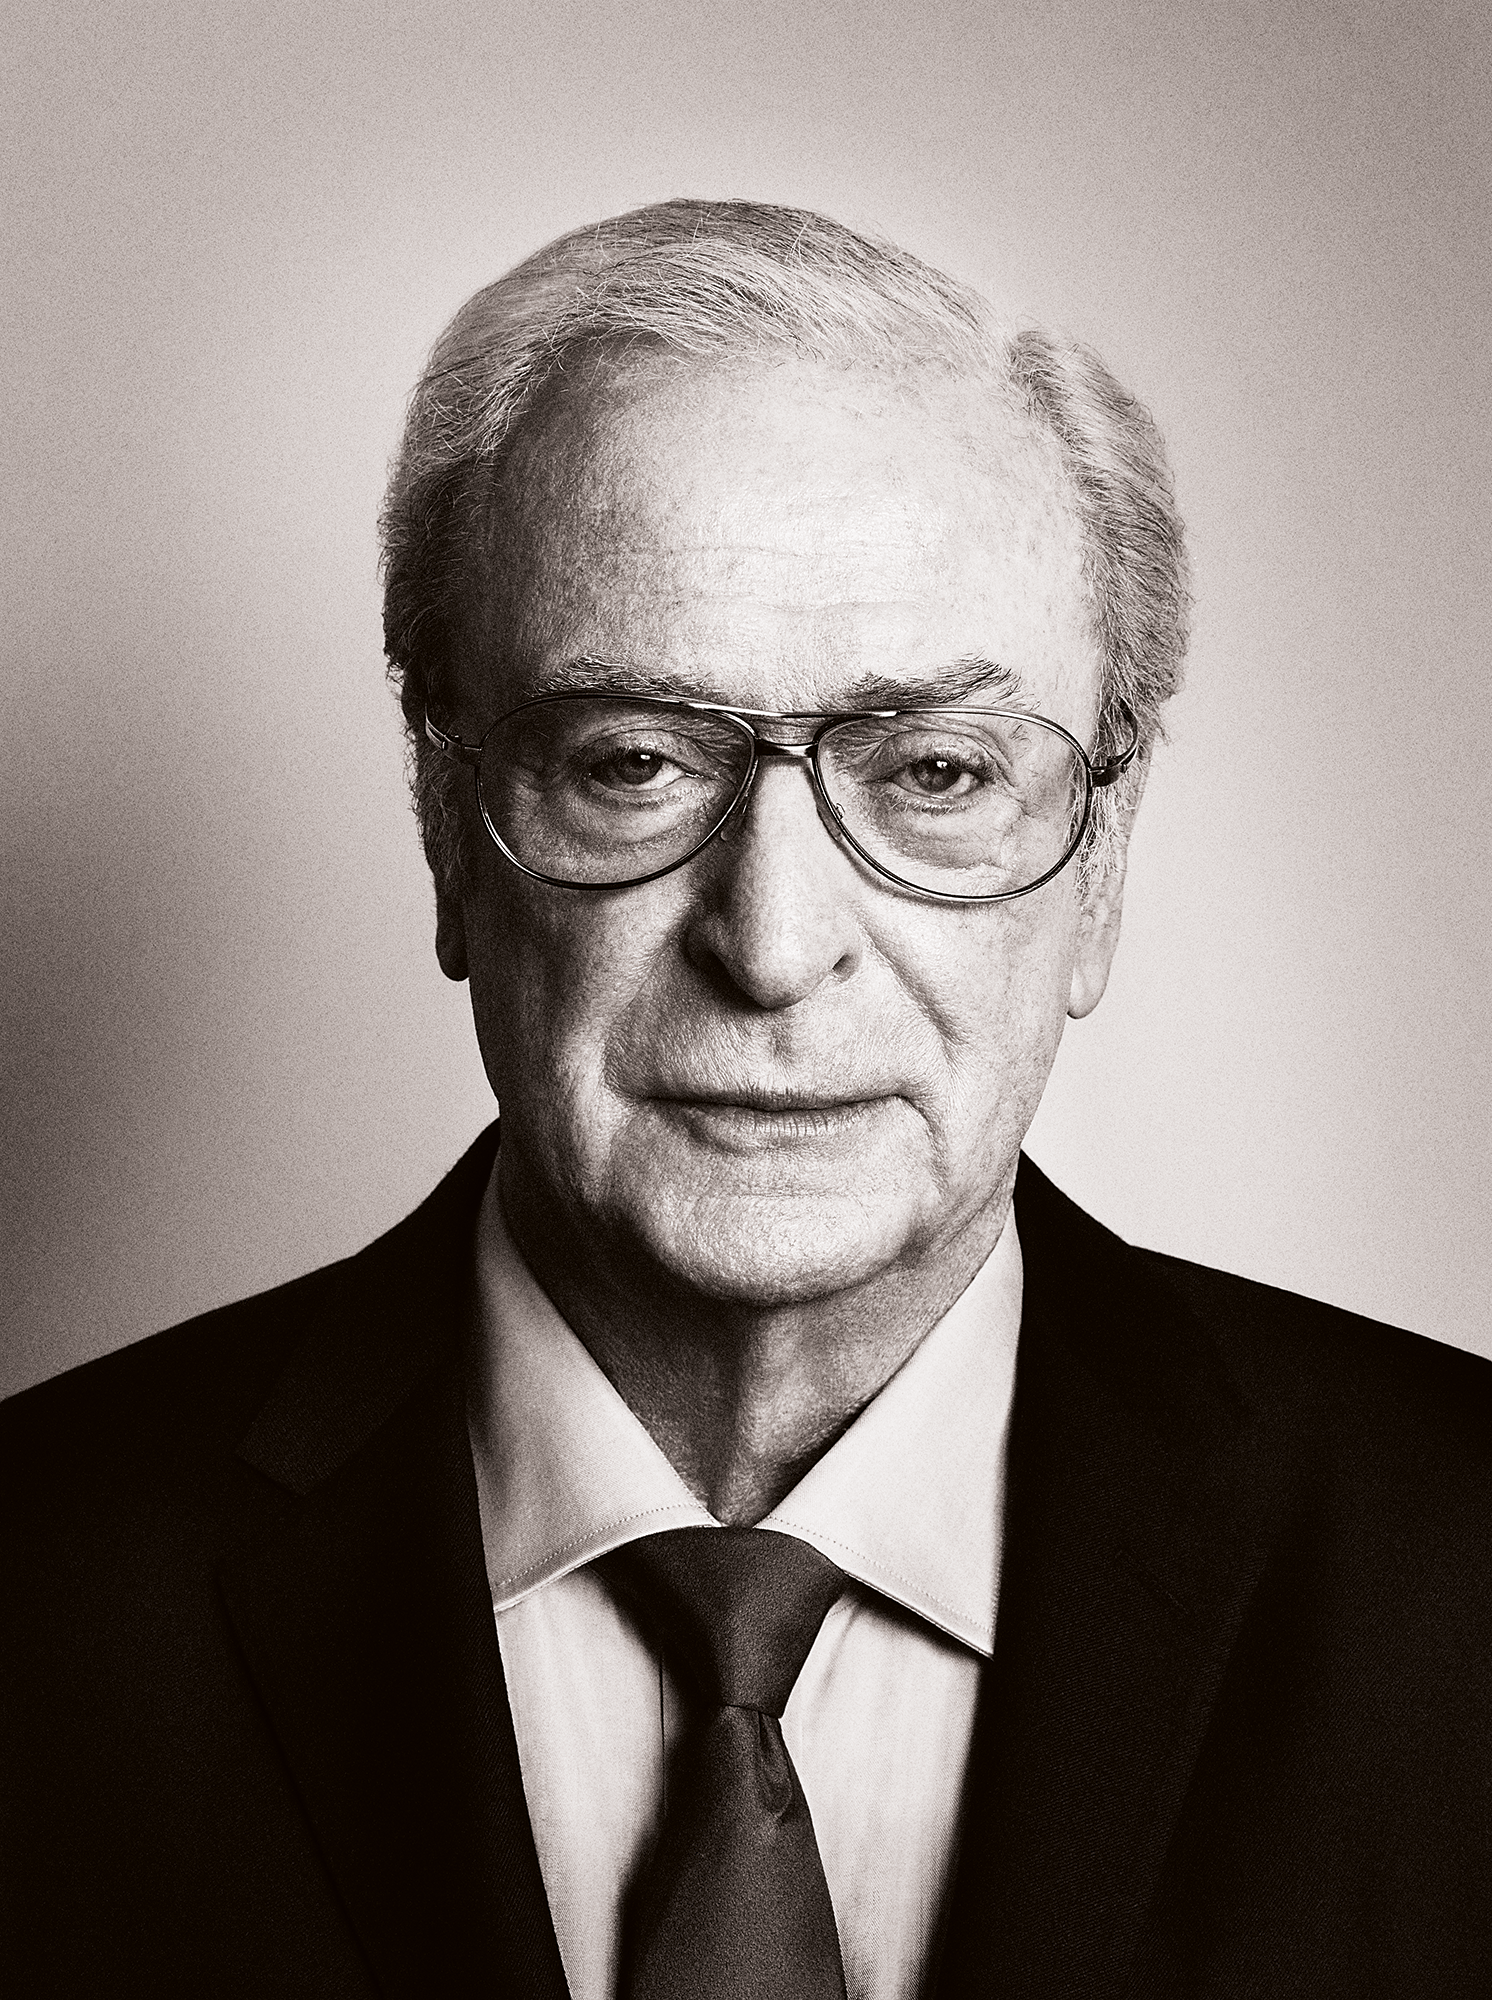 Michael Caine at 90 Discussing Life, Death and Everything In-between